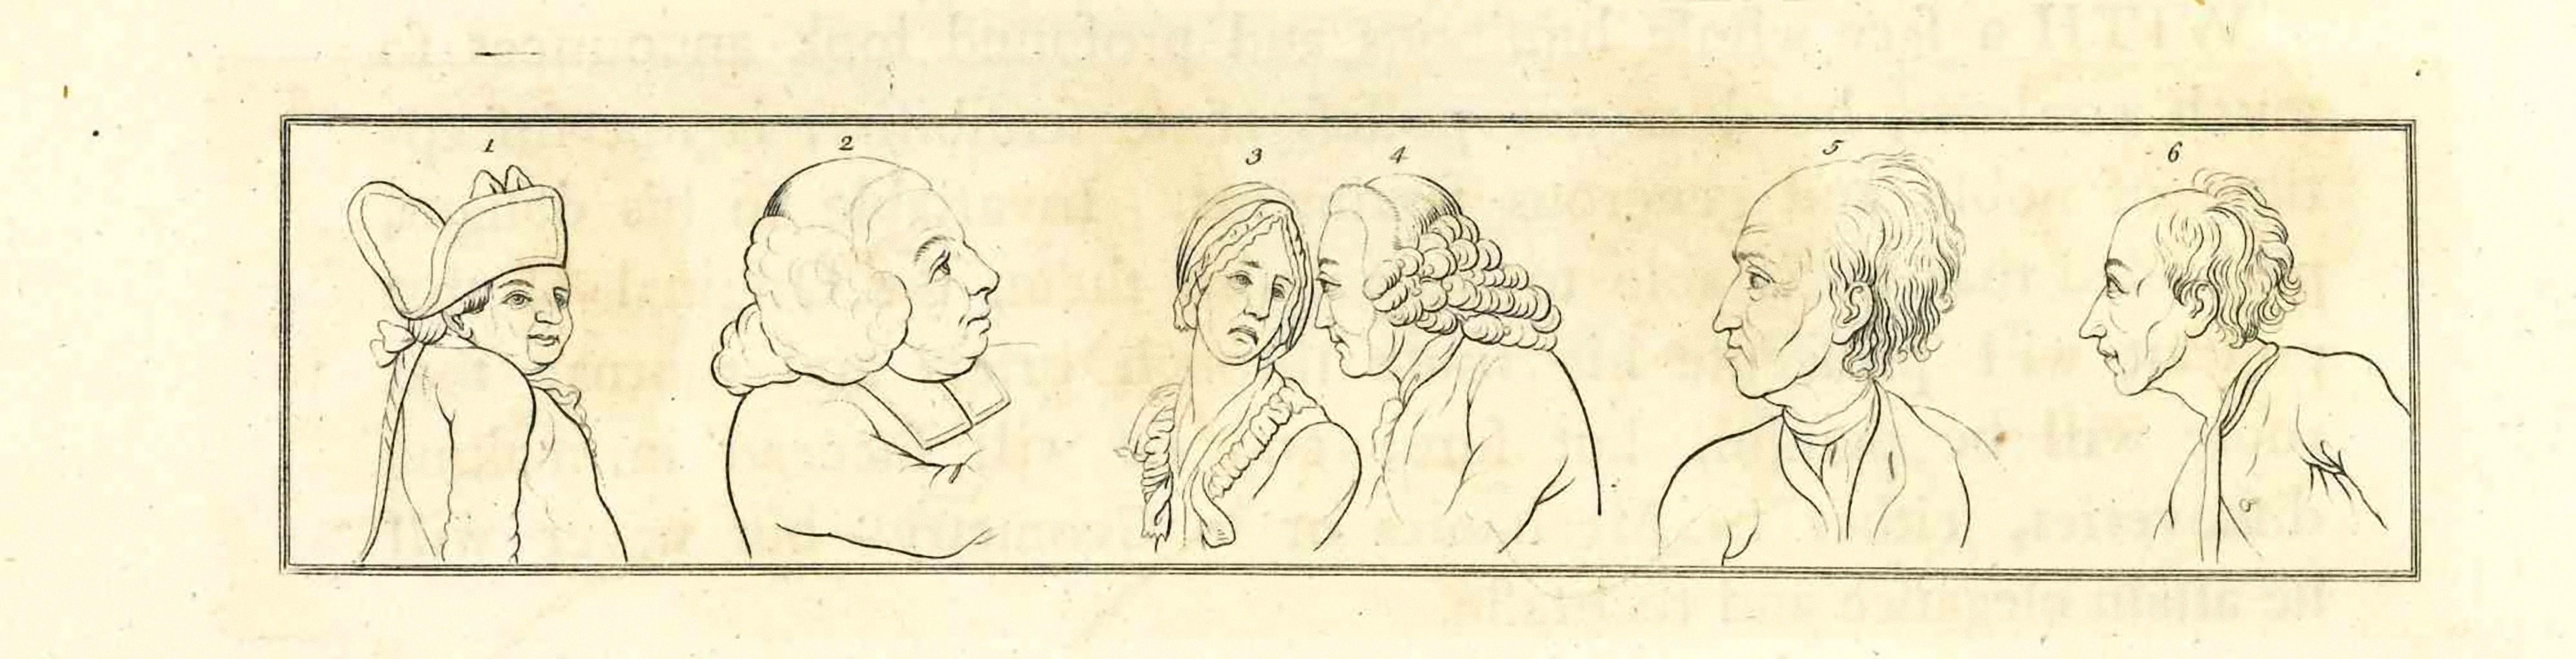 The profile of men and women is an original etching artwork realized by Thomas Holloway for Johann Caspar Lavater's "Essays on Physiognomy, Designed to Promote the Knowledge and the Love of Mankind", London, Bensley, 1810. 

With the script on the